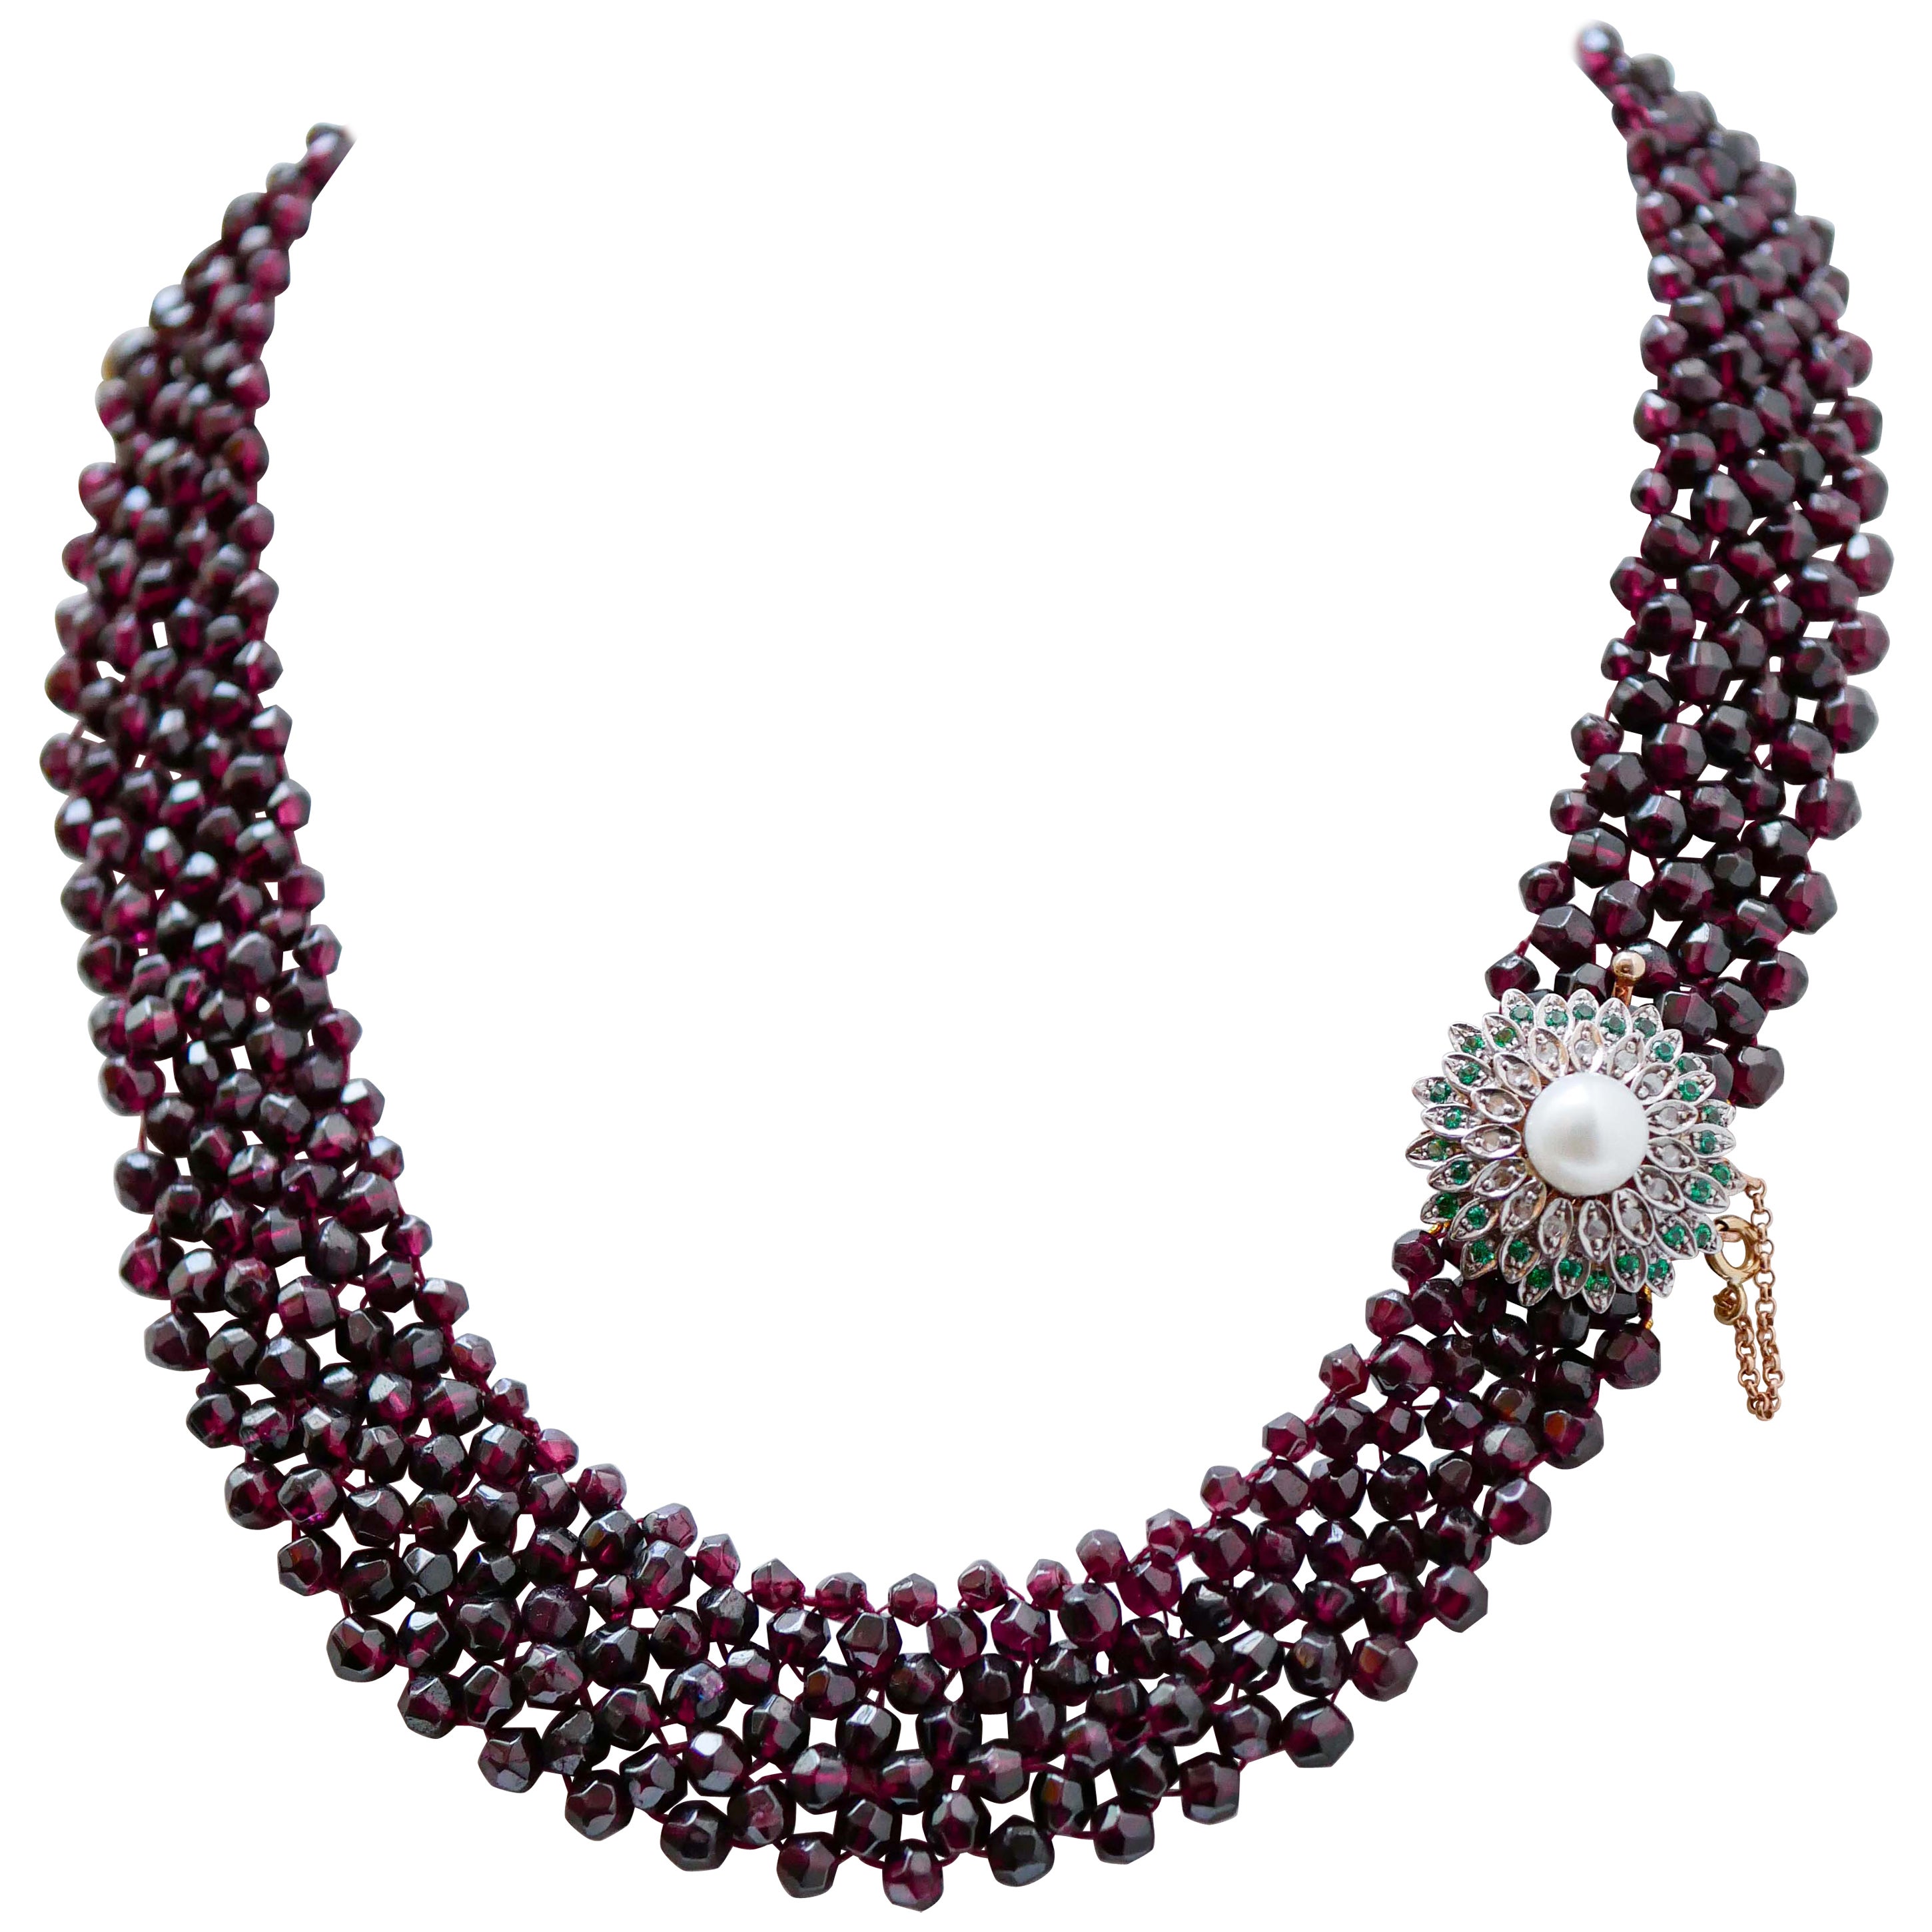 Garnets, Hydrothermal Spinel, Diamonds, Pearl, Rose Gold and Silver Necklace.